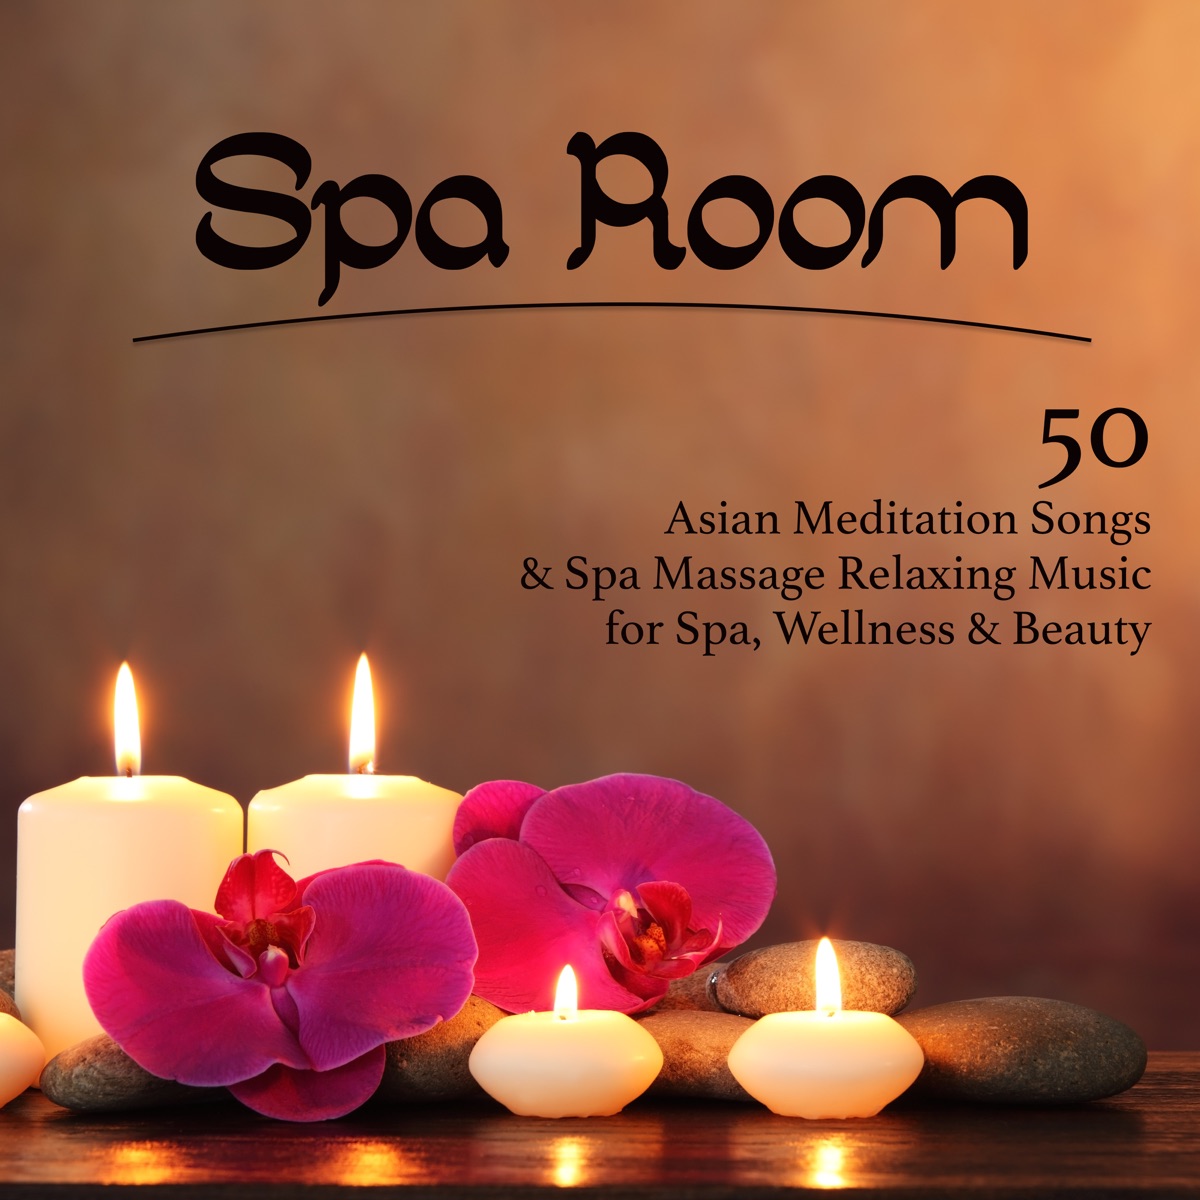 Spa Room - 50 Asian Meditation Songs & Spa Massage Relaxing Music for Spa,  Wellness & Beauty by Serenity Spa Music Relaxation on Apple Music